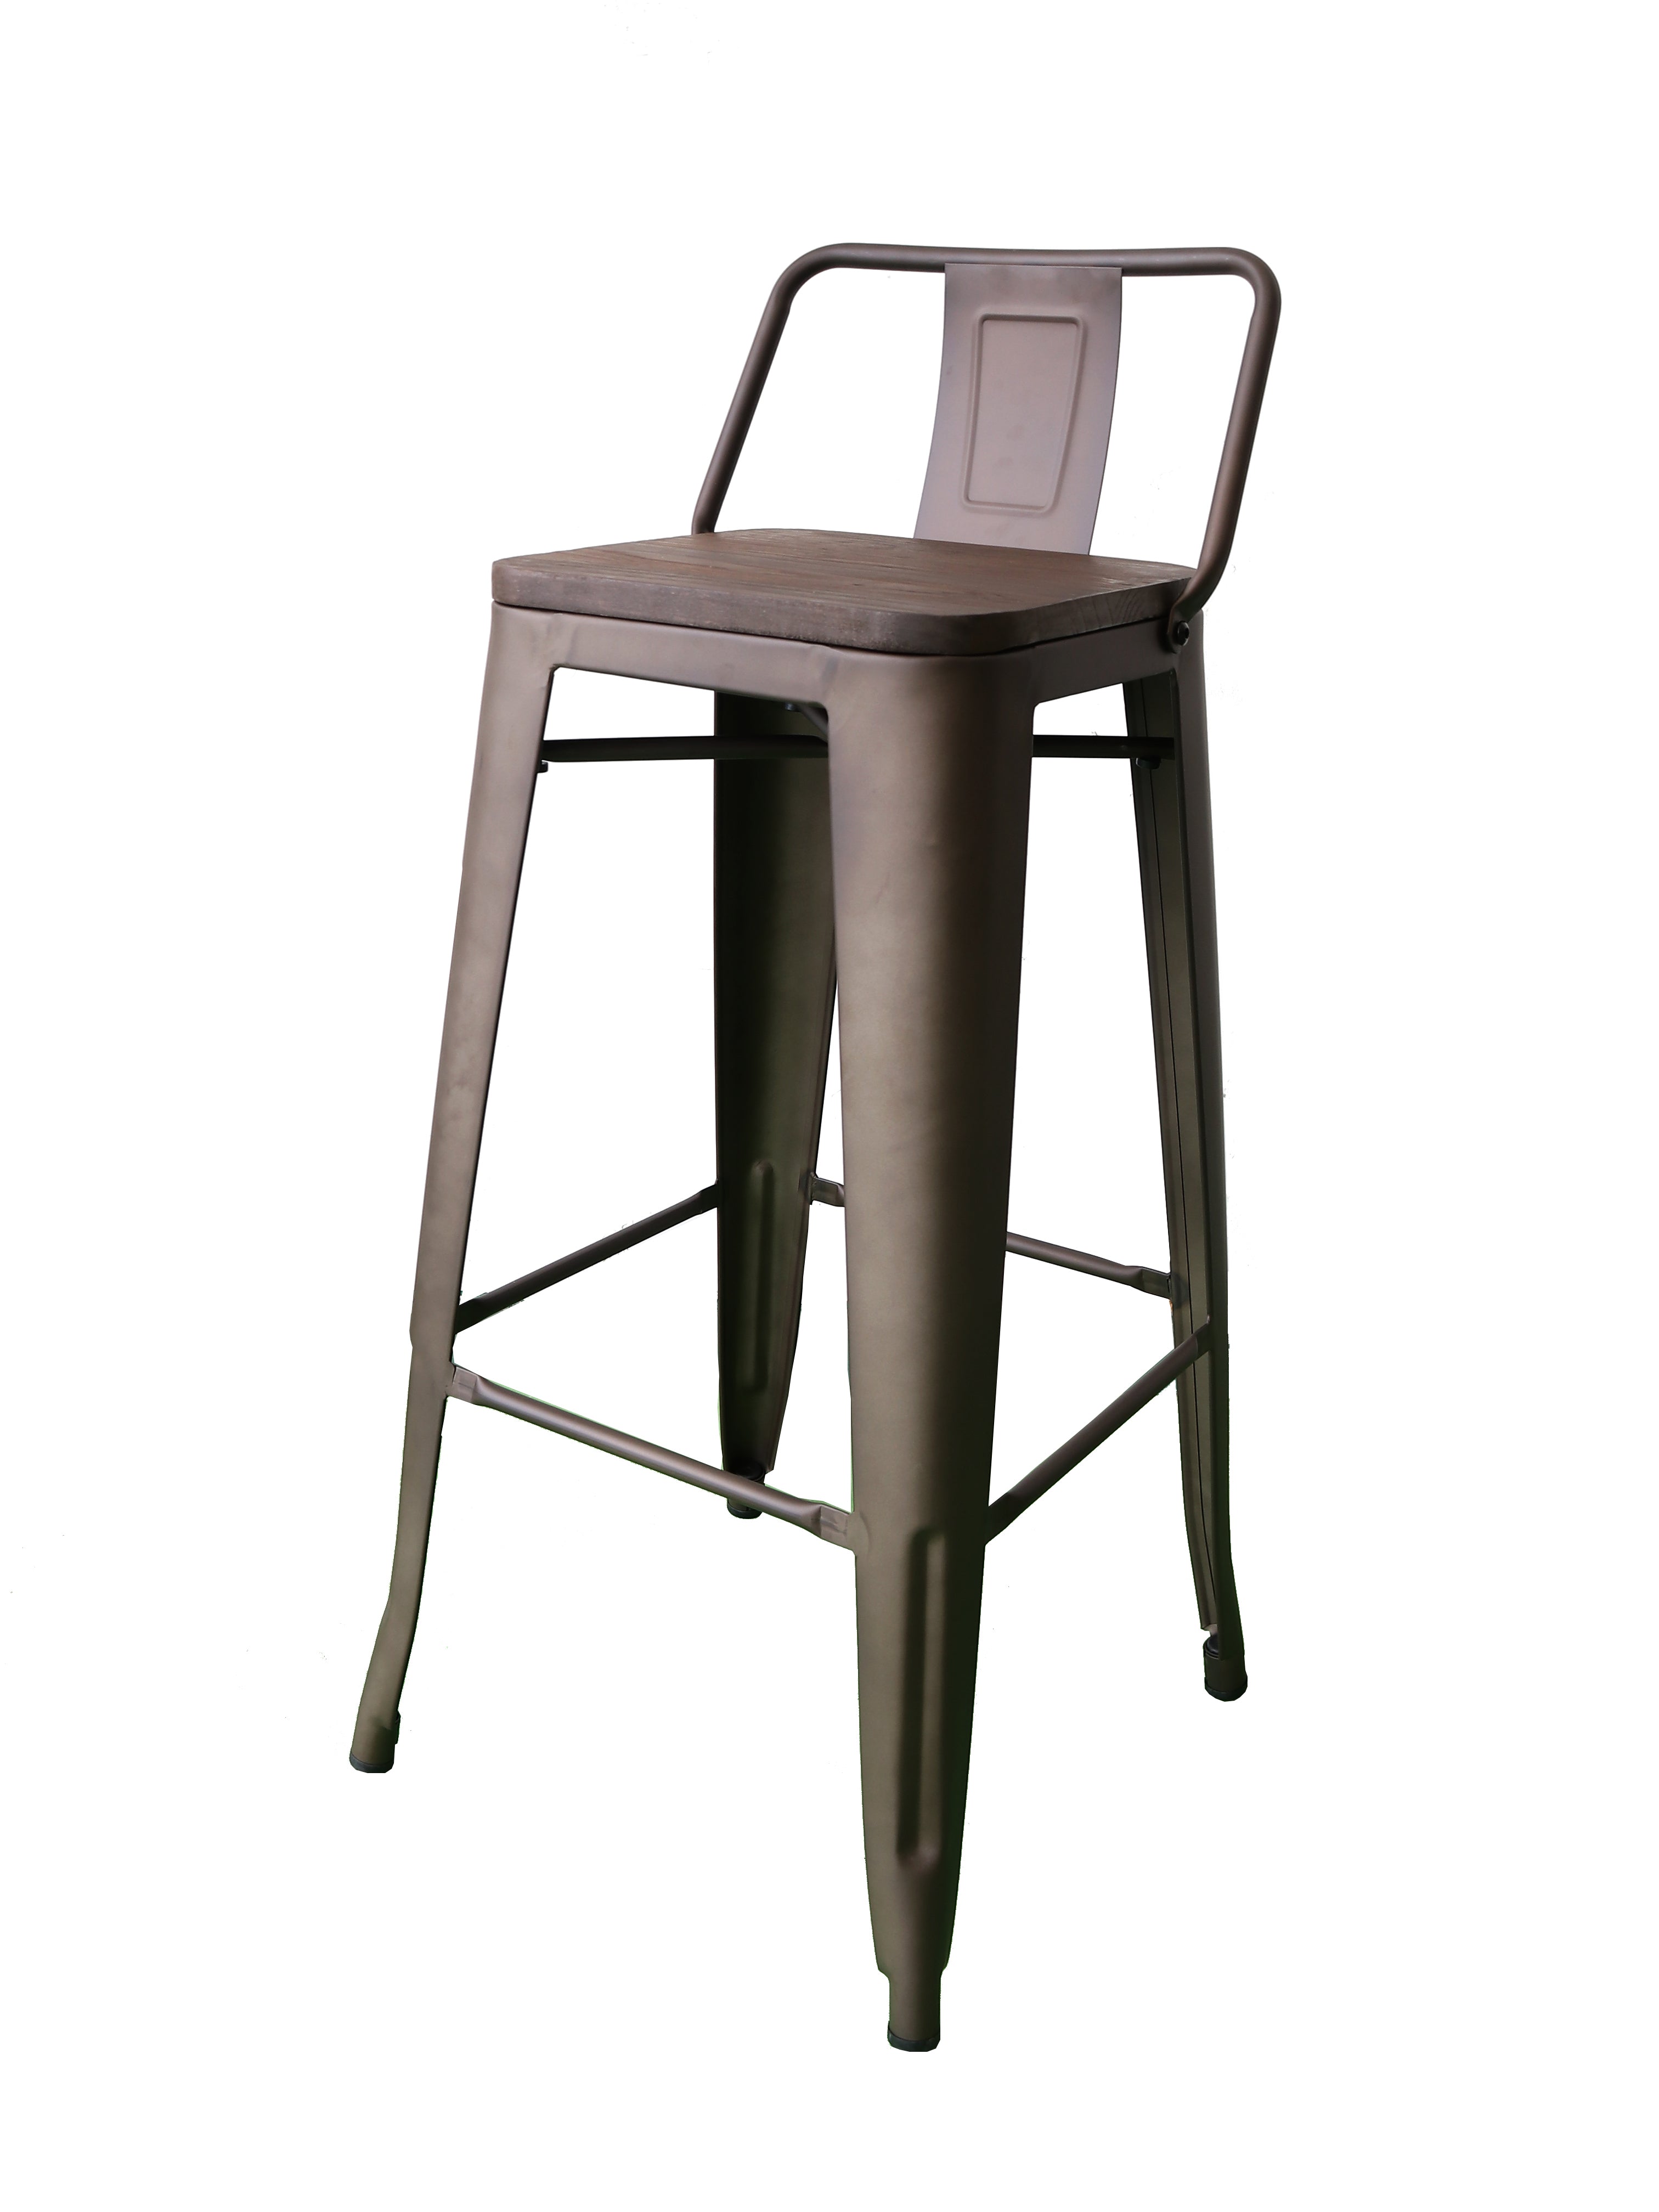 <b>Moticca Metal Bar Stool with Wooden Seat</b><br>W350 X D385 X H930MM